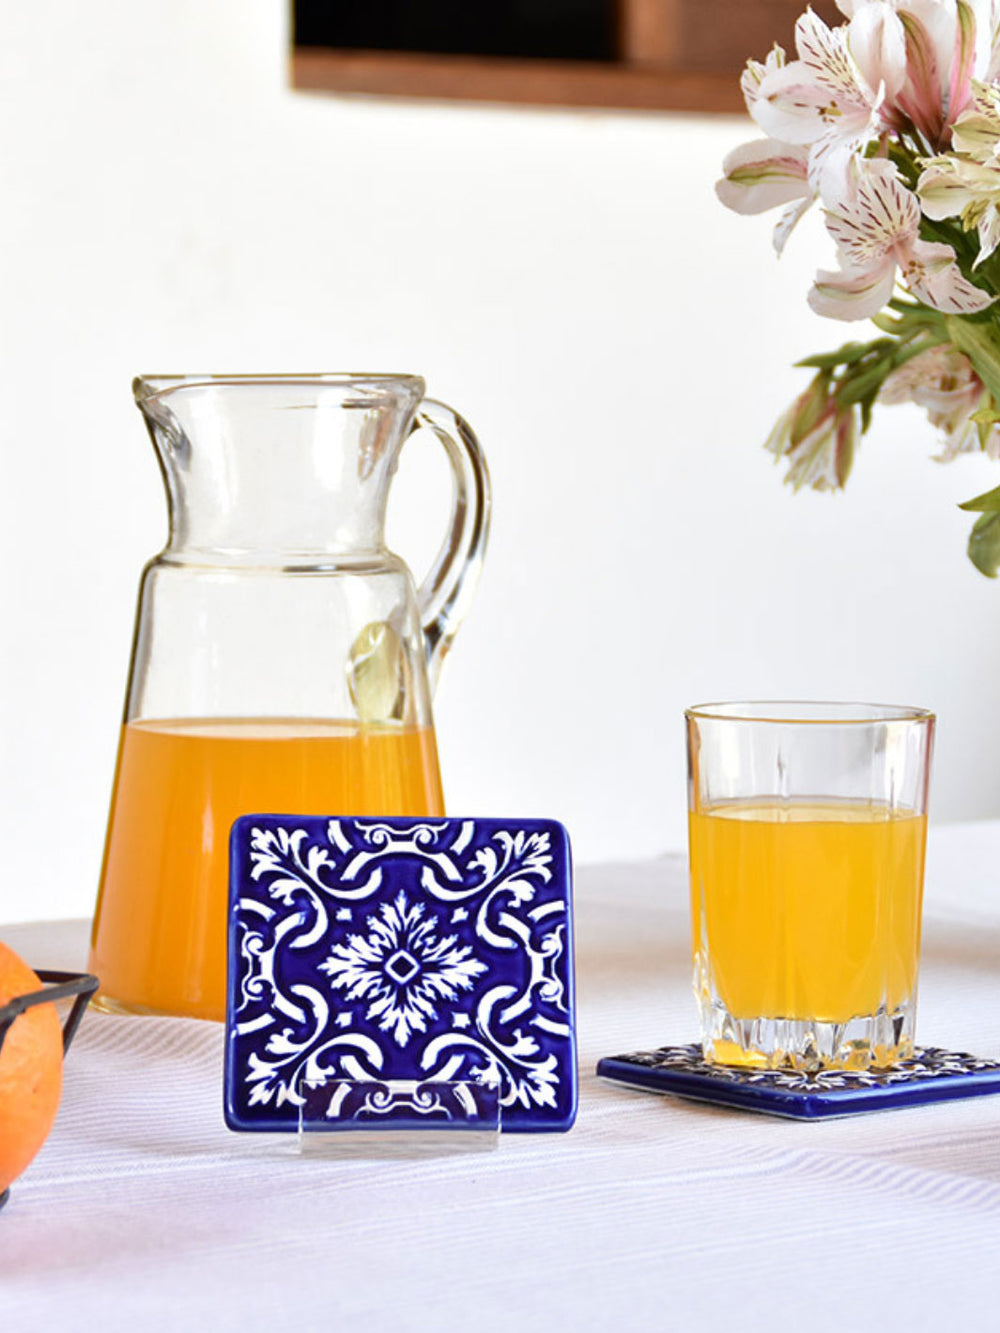 Portuguese Ceramic Tiles Drink Coasters and Table Trivets – We Are Portugal